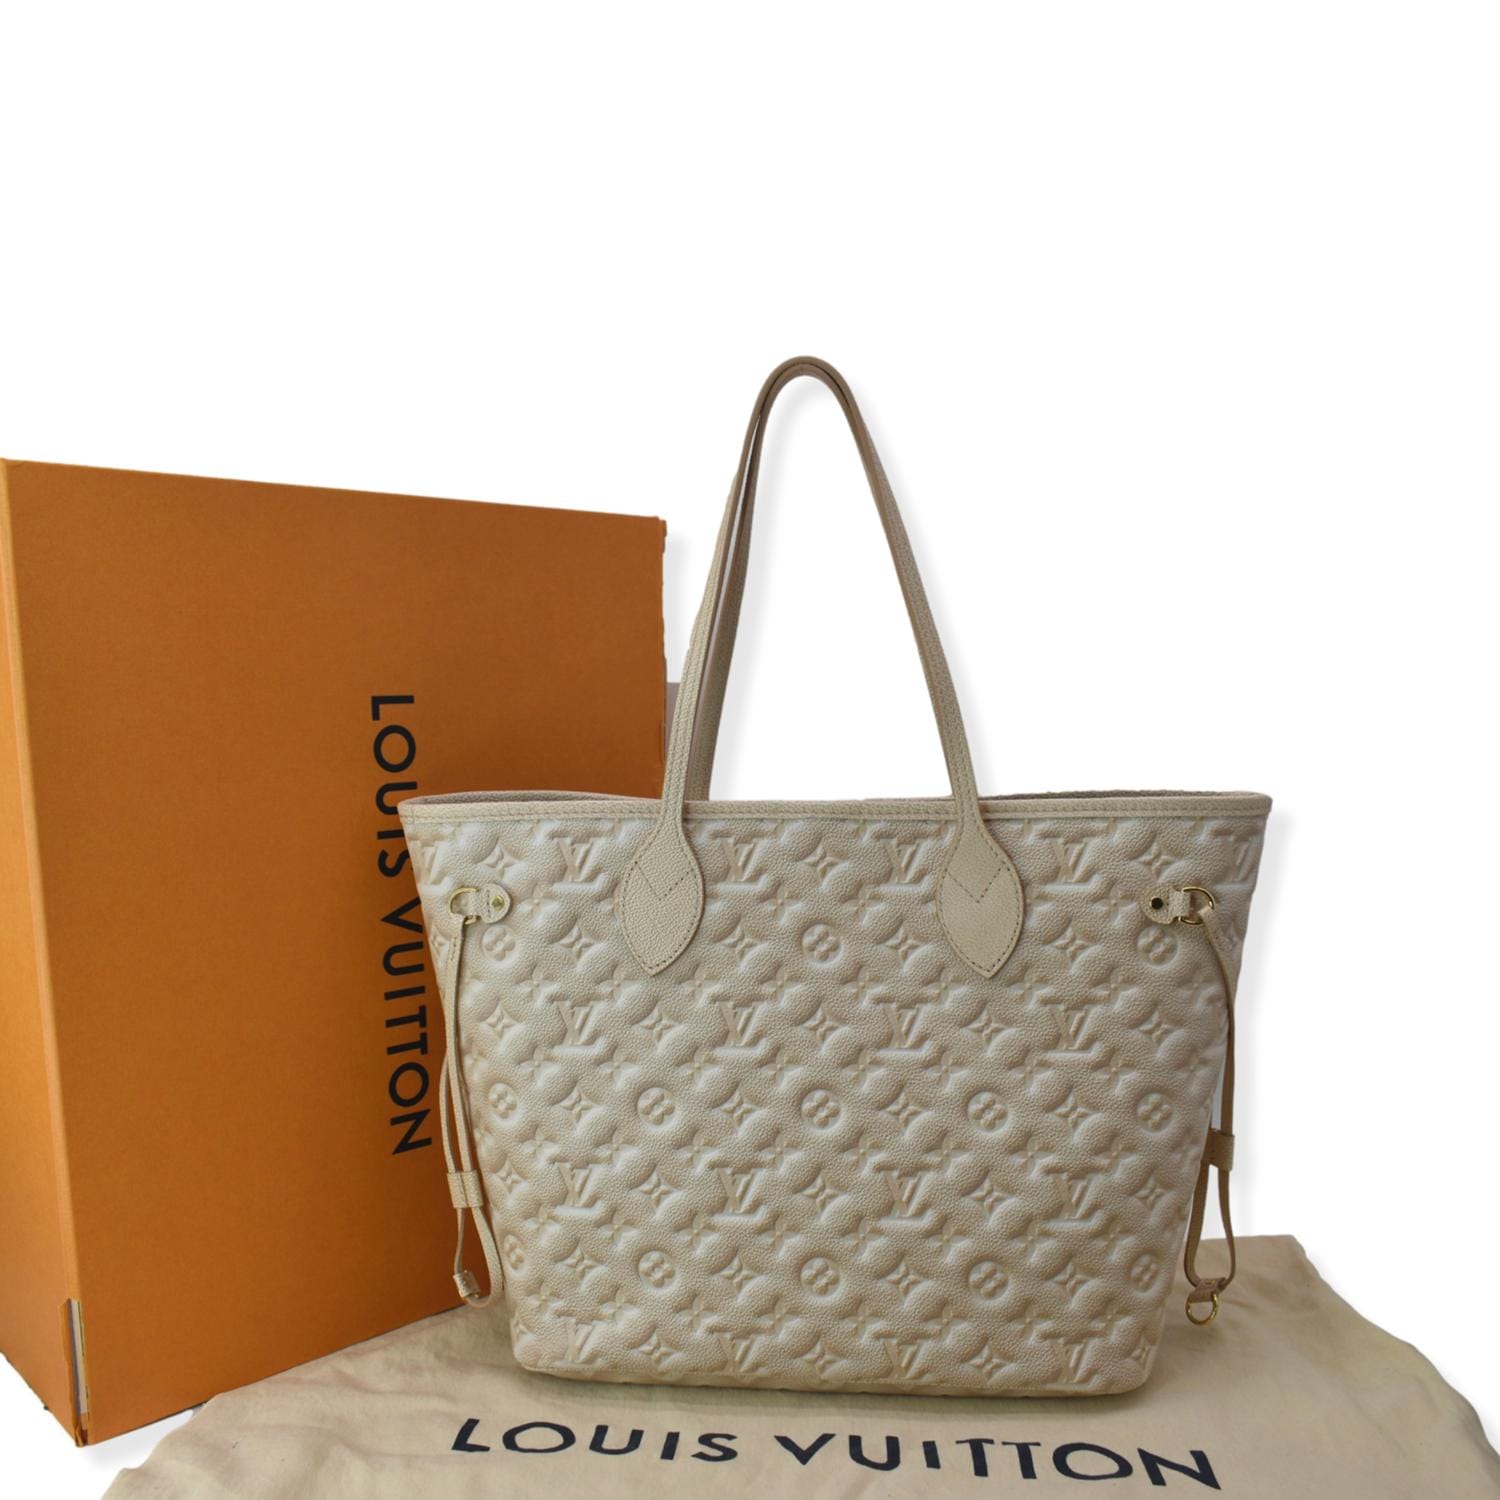 Louis Vuitton Pre-owned Women's Leather Tote Bag - Beige - One Size